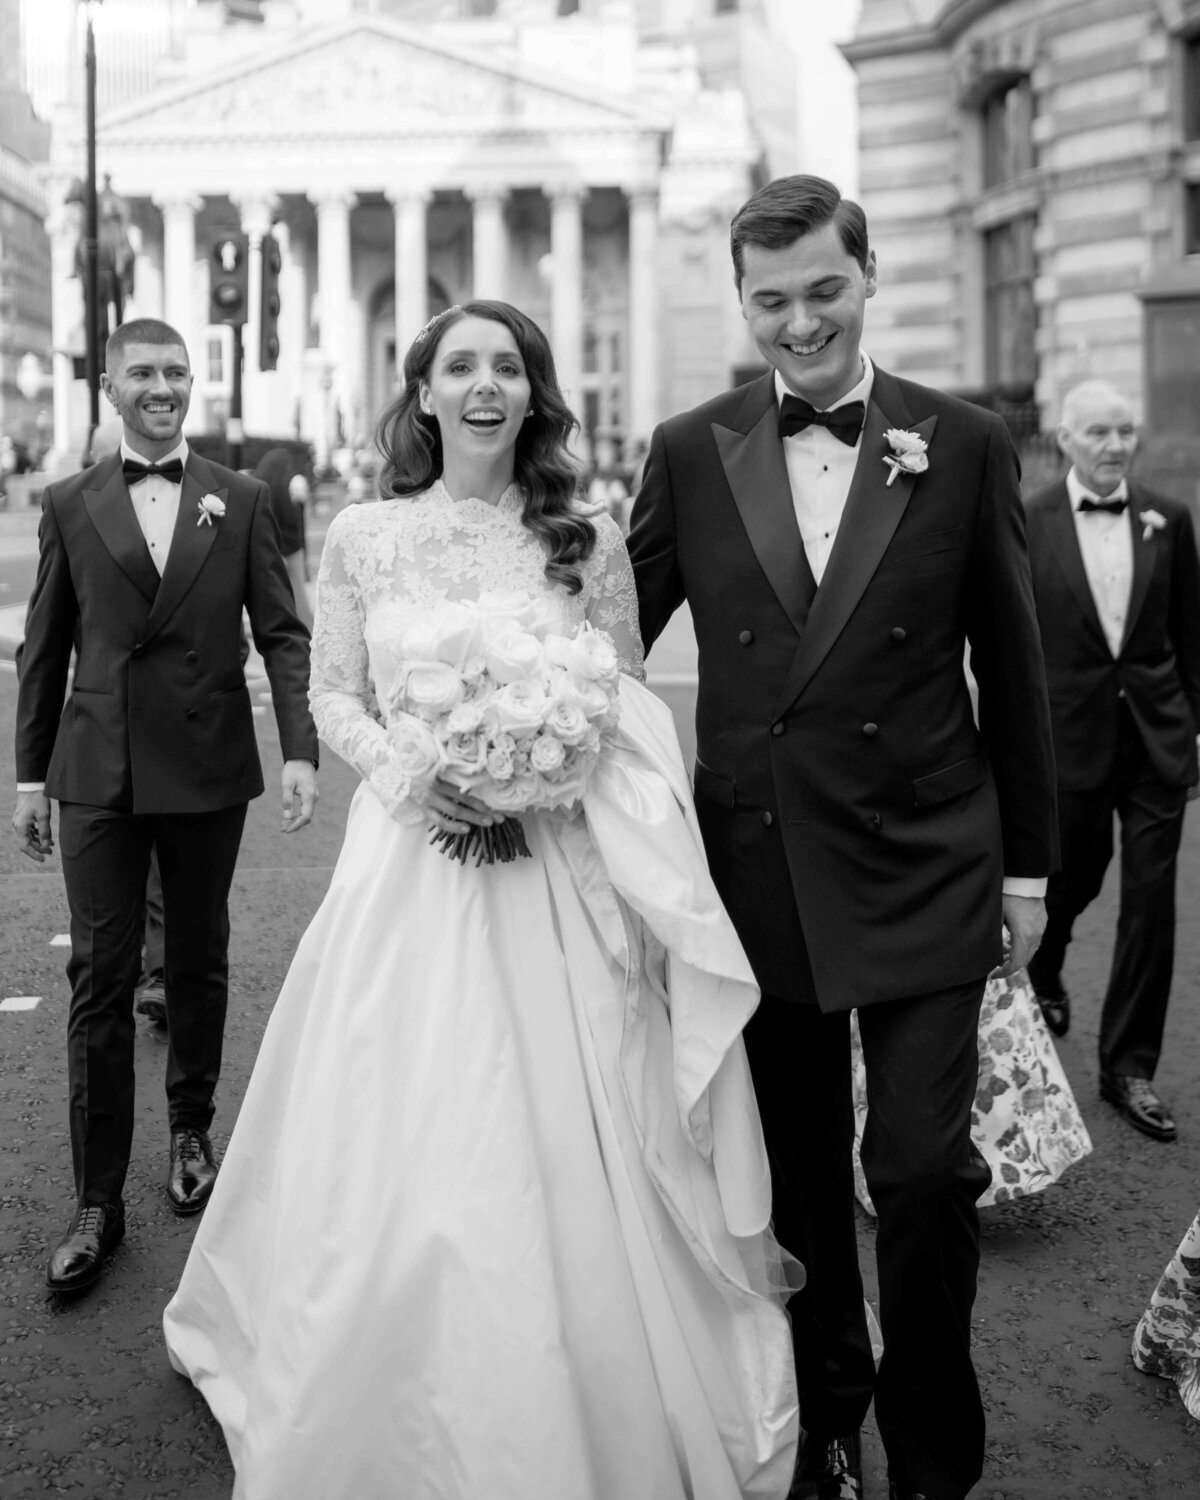 bride and groom walk with their bridal party through the streets of london laughing as they head to their luxury wedding reception at the ned hotel